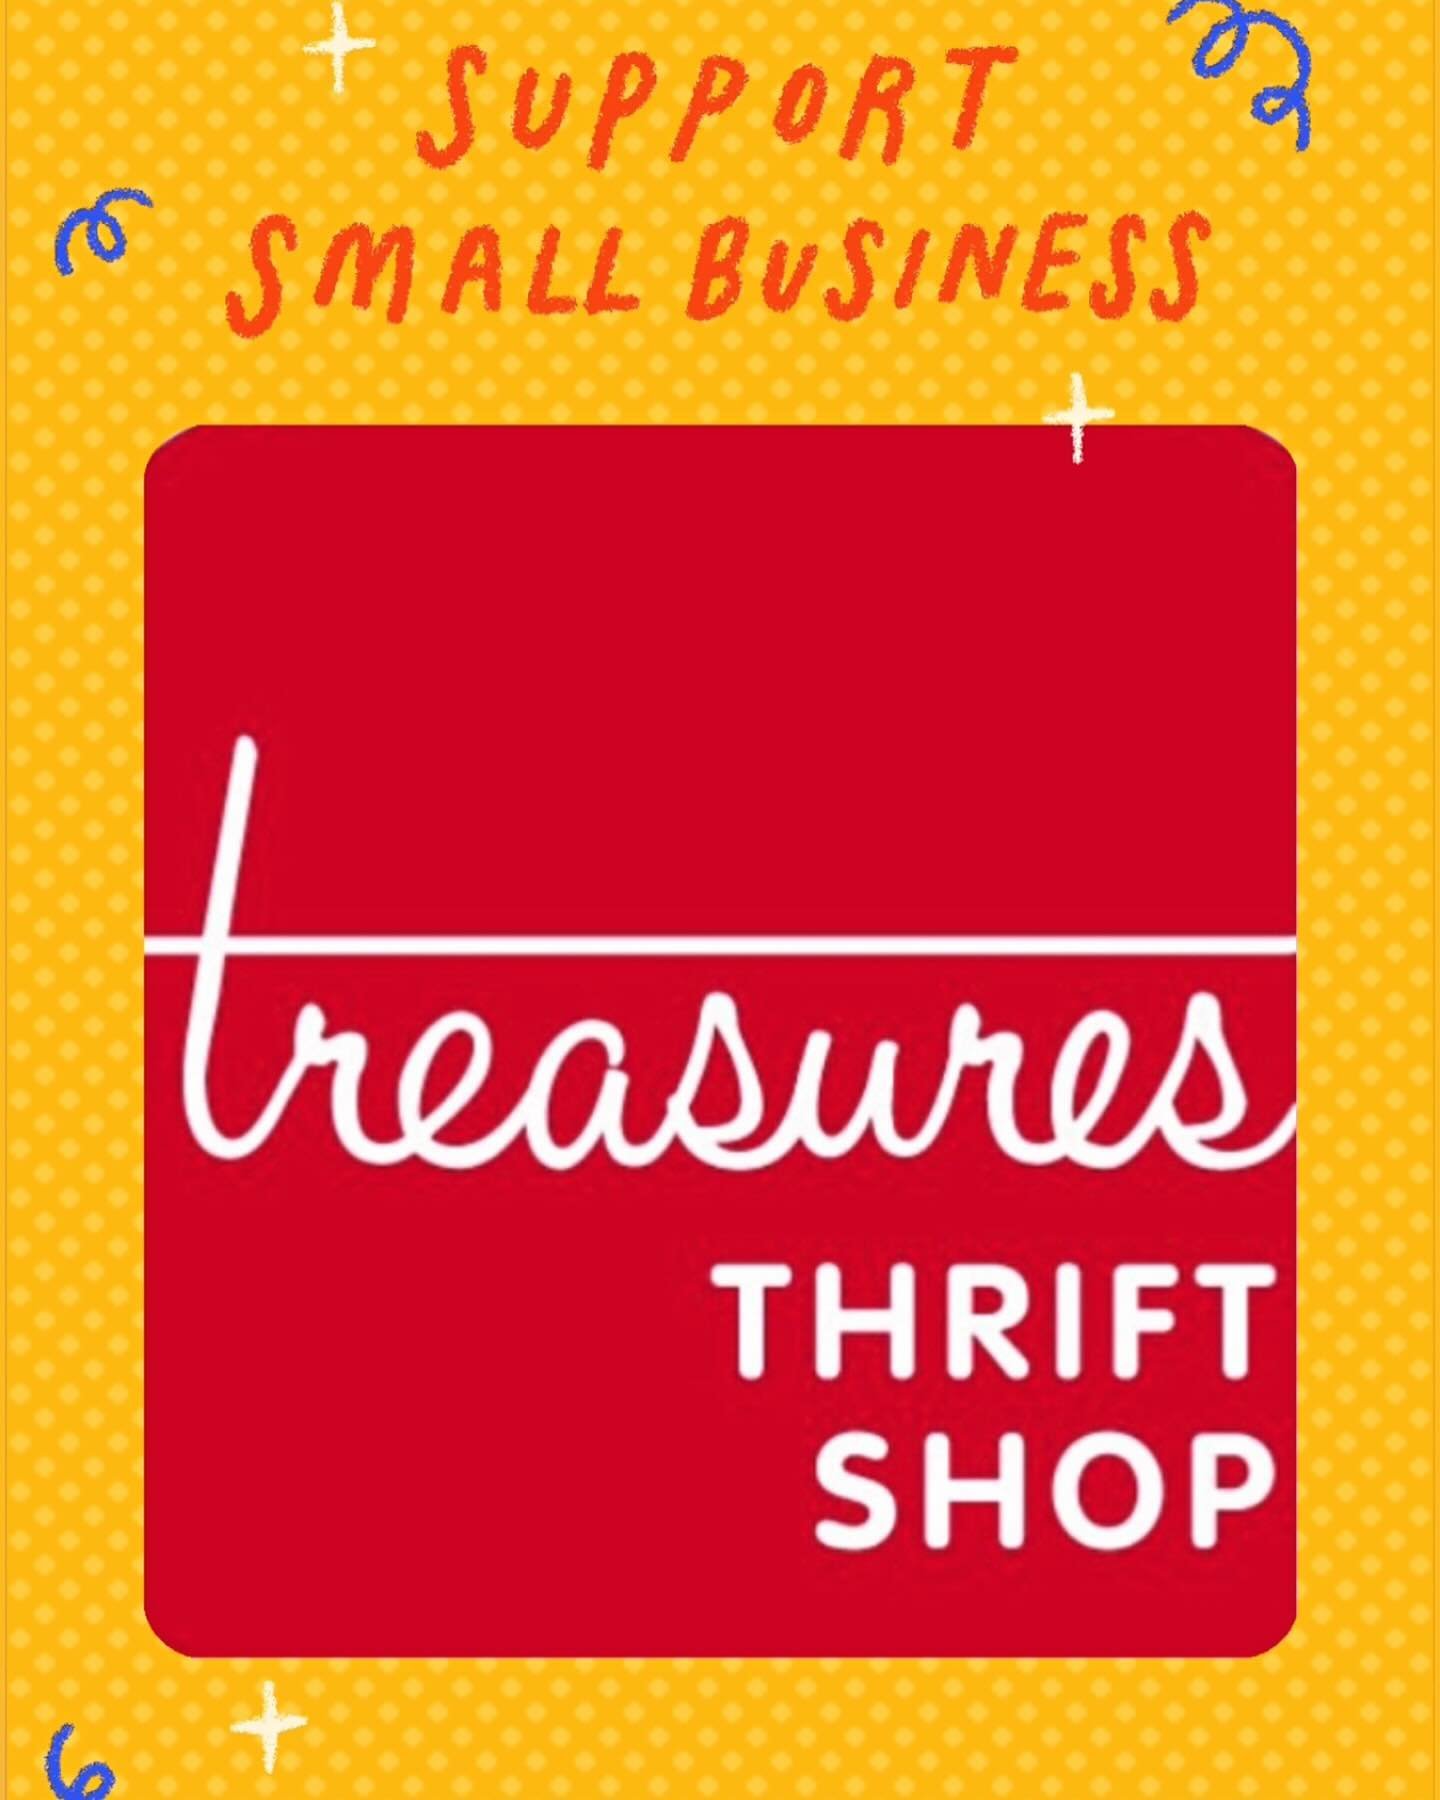 Join us in celebrating #SmallBusinessWeek by supporting the  work of non-profits like us - Treasures Thrift Shop!

Plus, Treasures Thrift Shop proudly supports, through proceeds of sales, SEVEN other local non-profits, including:

*The Mount Kisco In